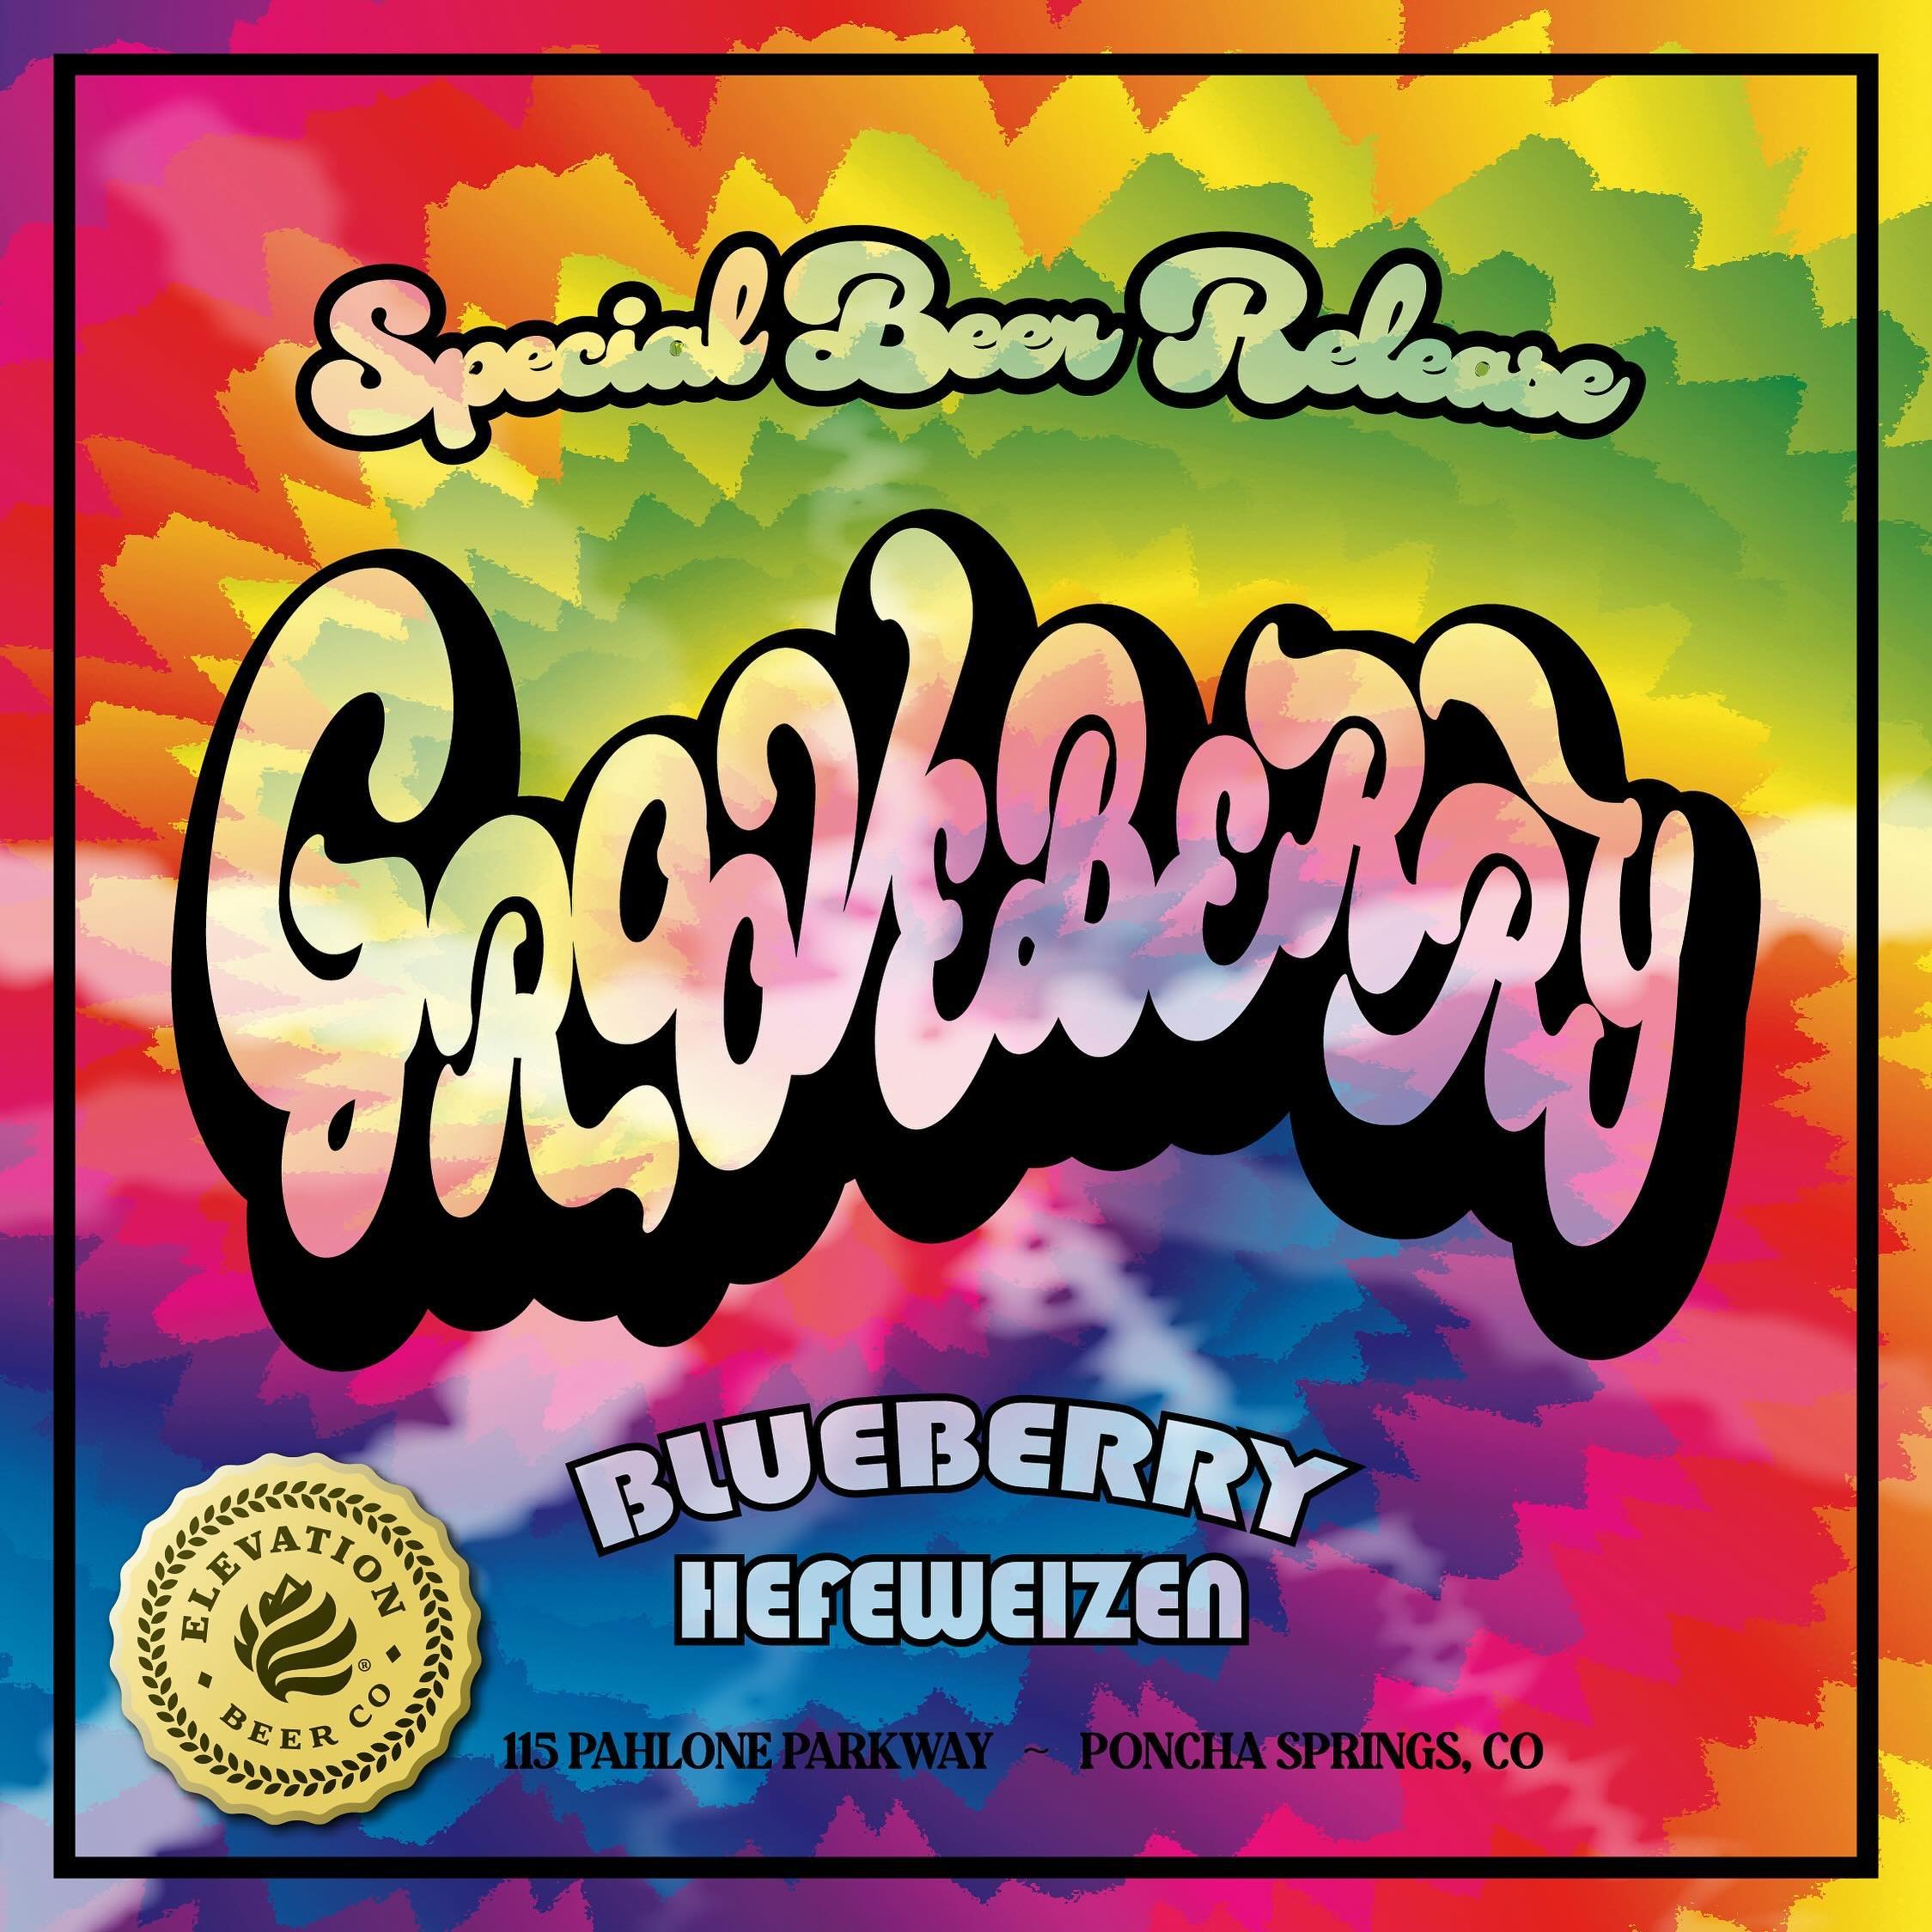 Everything is Grooveberry, baby! We&rsquo;re excited to announced our special 12th Anniversary beer release, Grooveberry. Go with the flow with this Blueberry Hefeweizen this Saturday (June 8th) and stay trippy, little hippie.